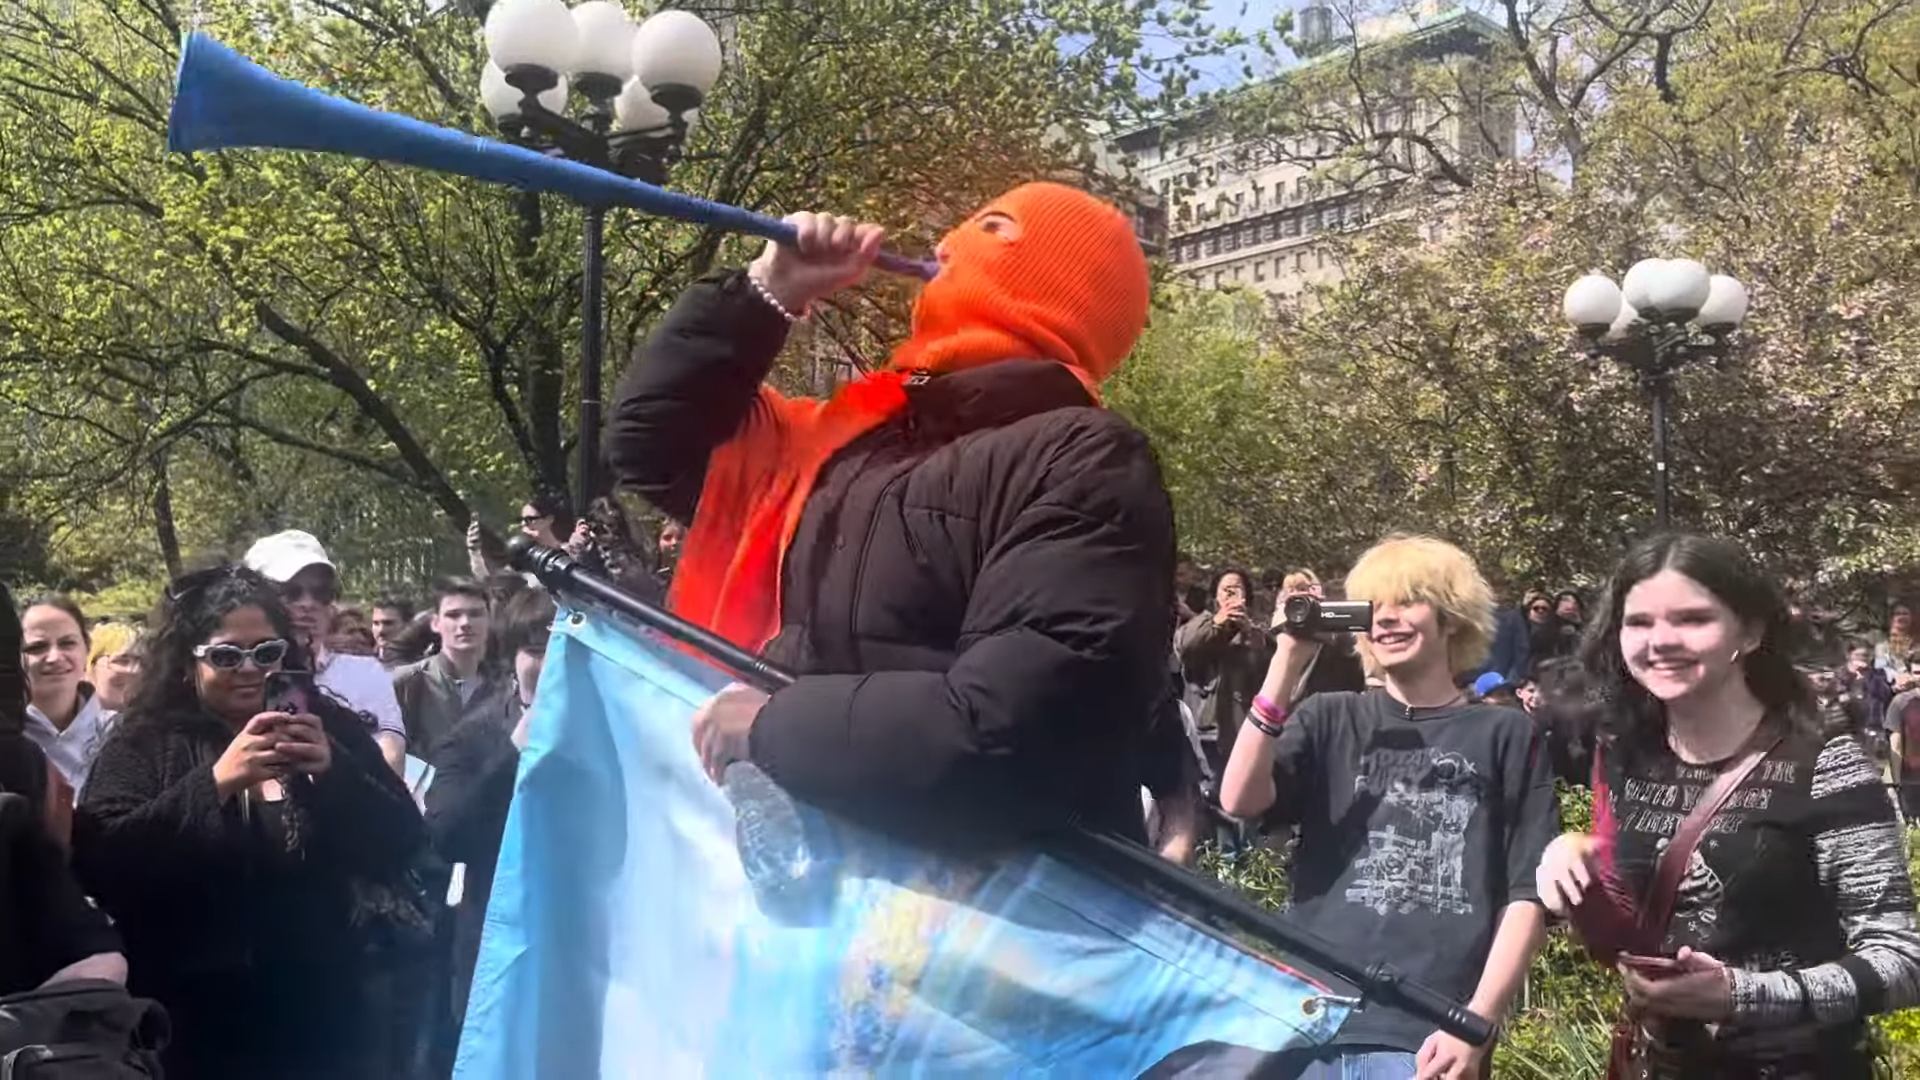 Cheeseballman in orange ski mask and black jacket, surrounded by onlookers